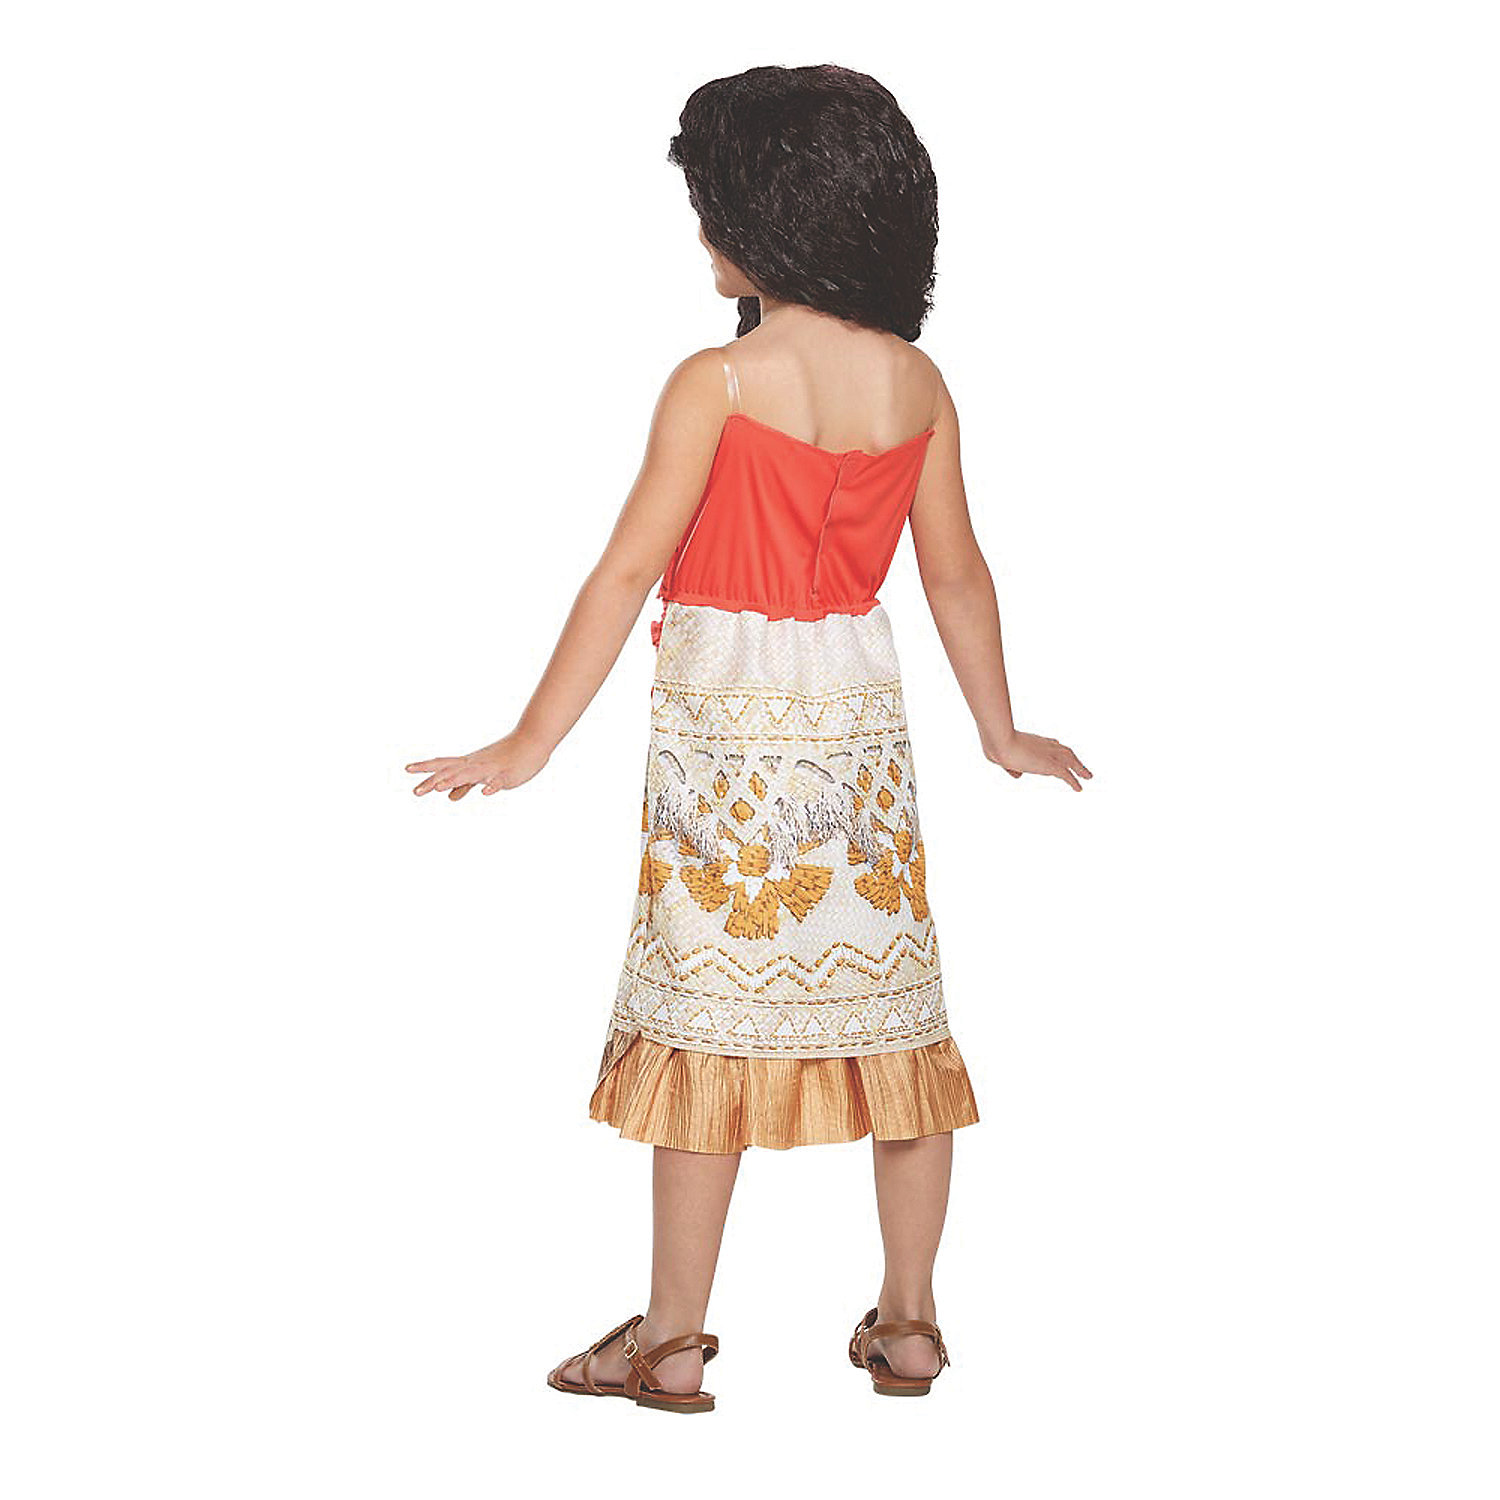 Disguise Girls' Moana Classic Costume - 4-6X - image 3 of 3